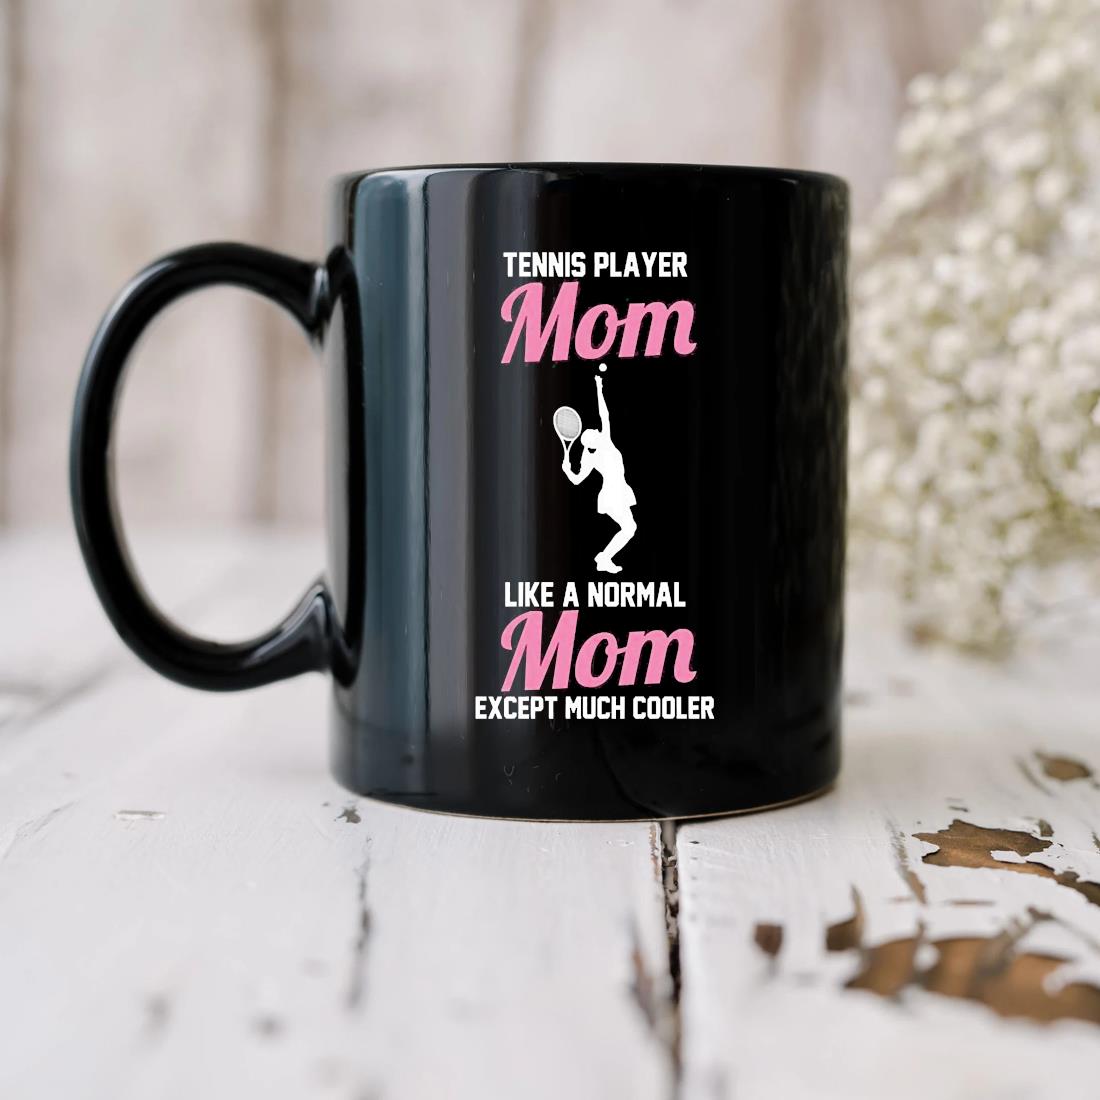 Svg Tennis Player Mom Like A Normal Mom Except Much Cooler Mug